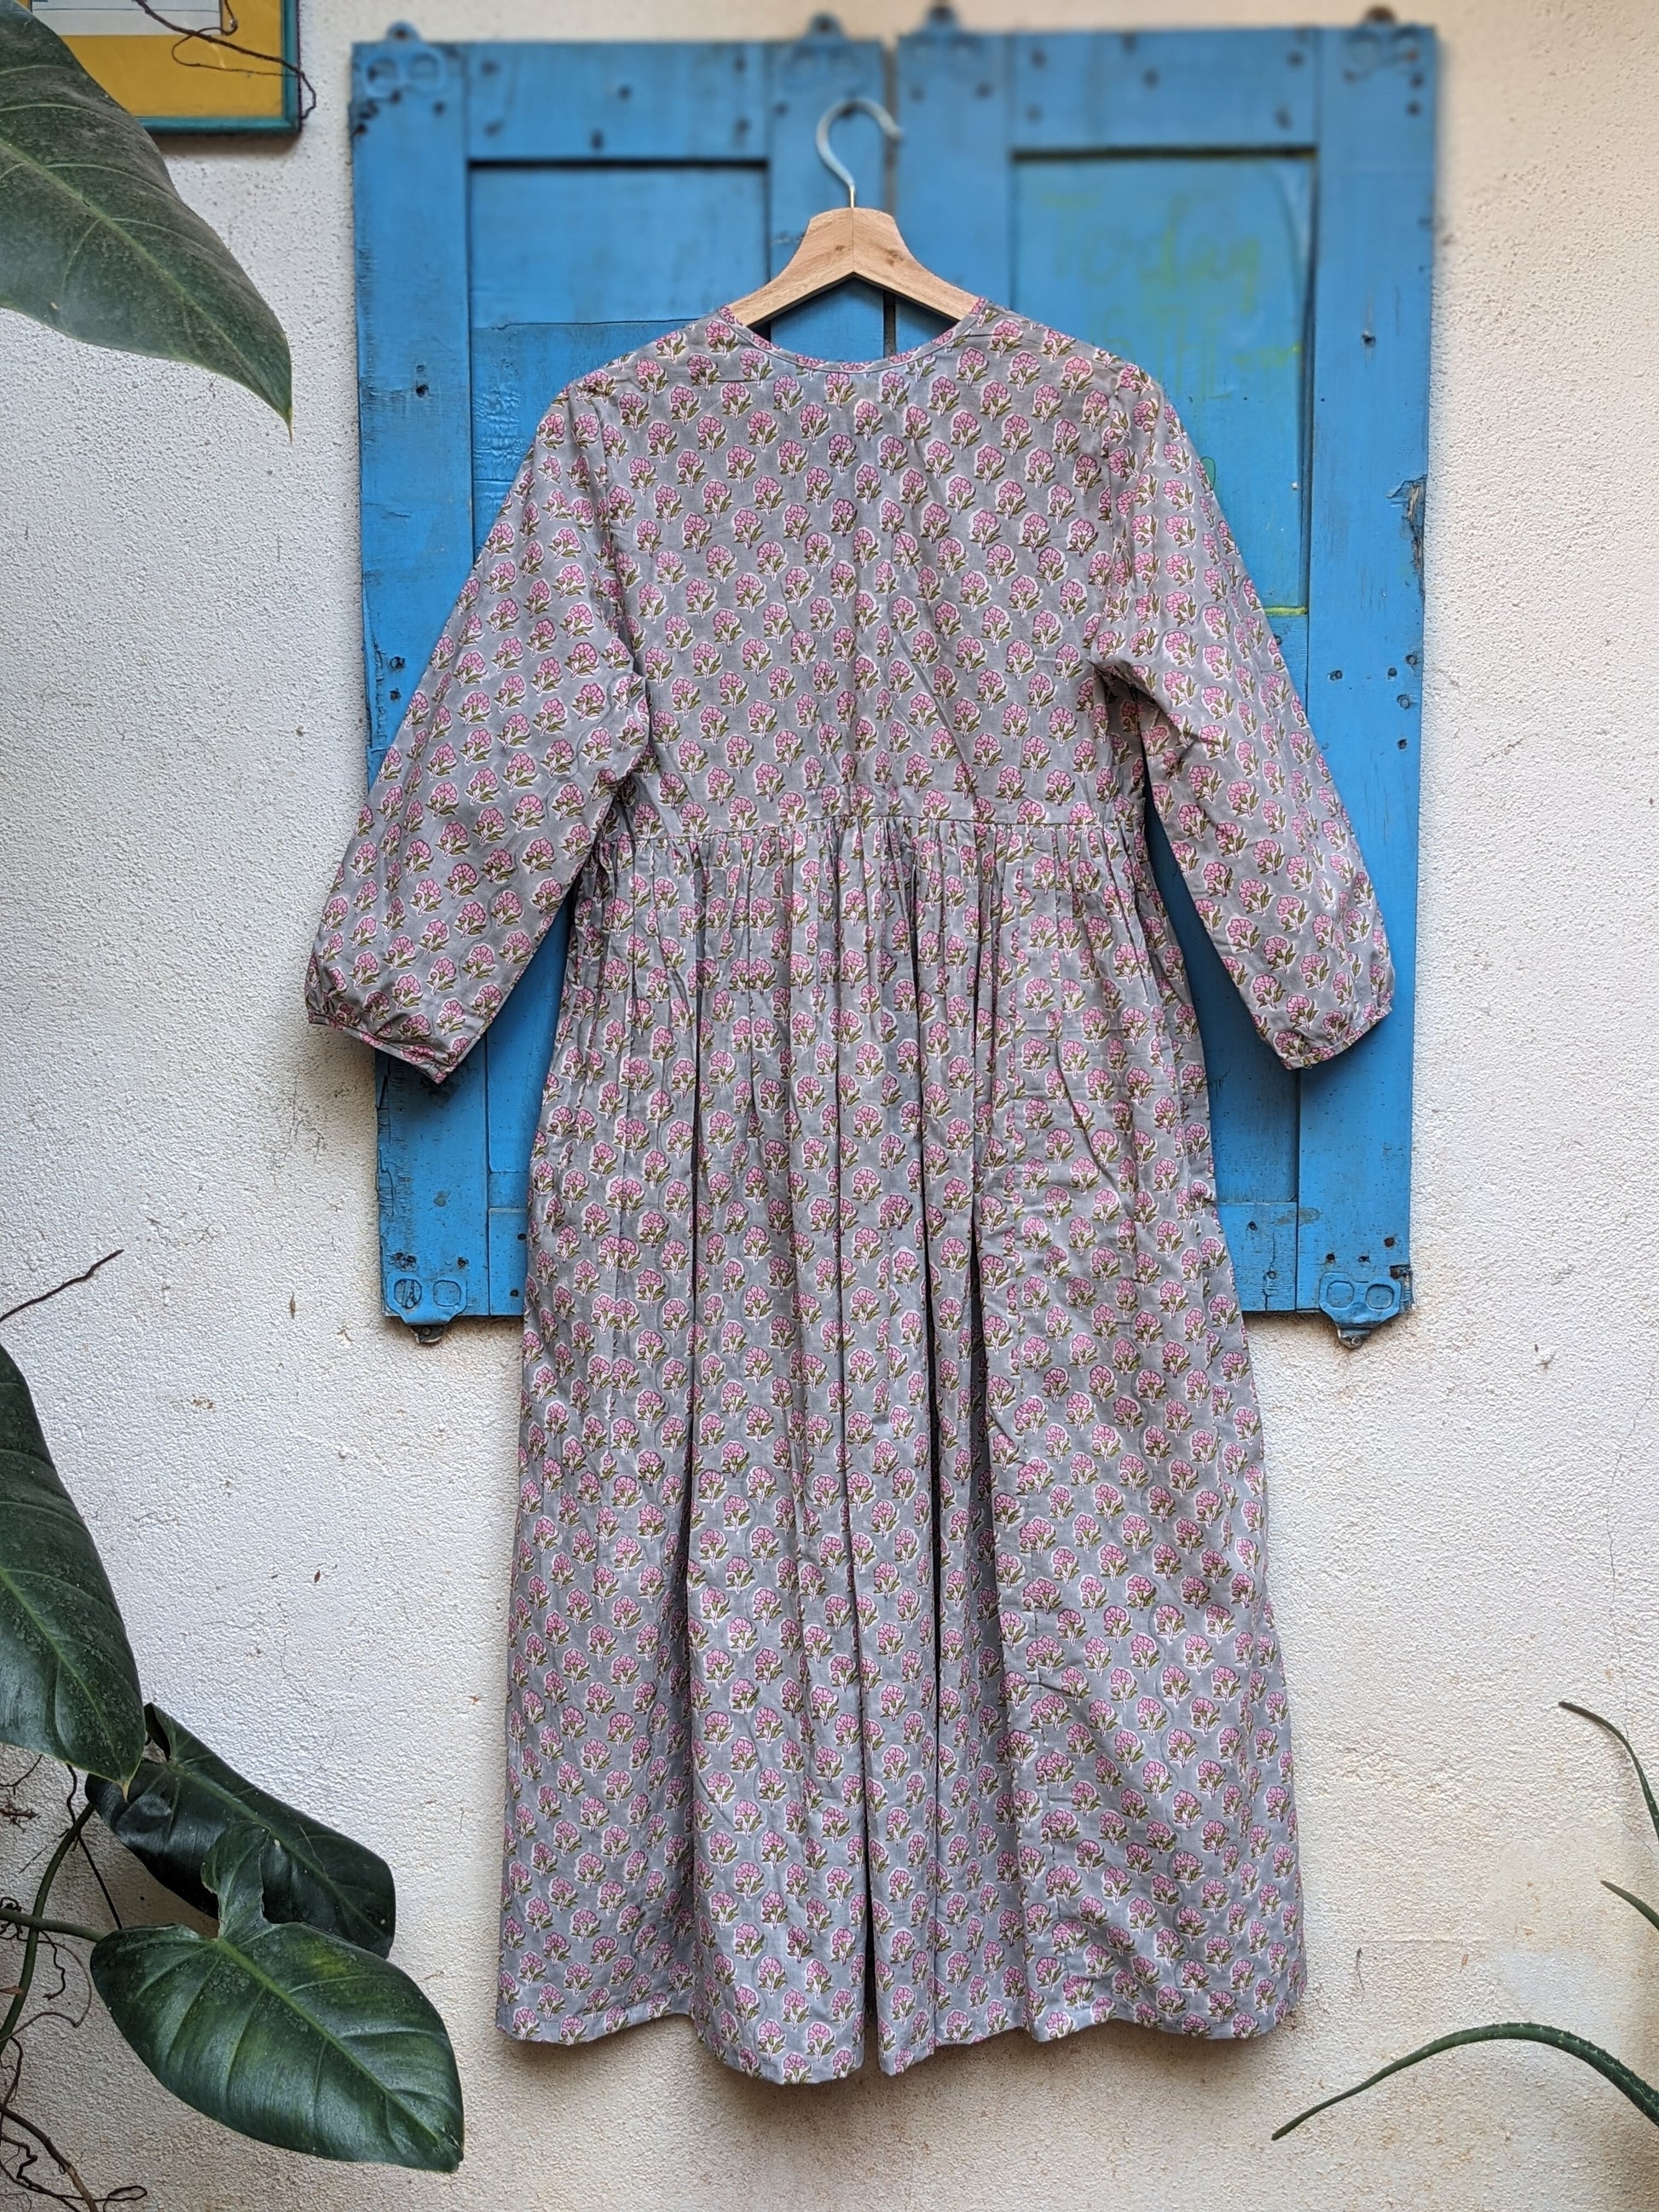 Women's cotton full length dress with 3/4th sleeves, floral block print - Back image